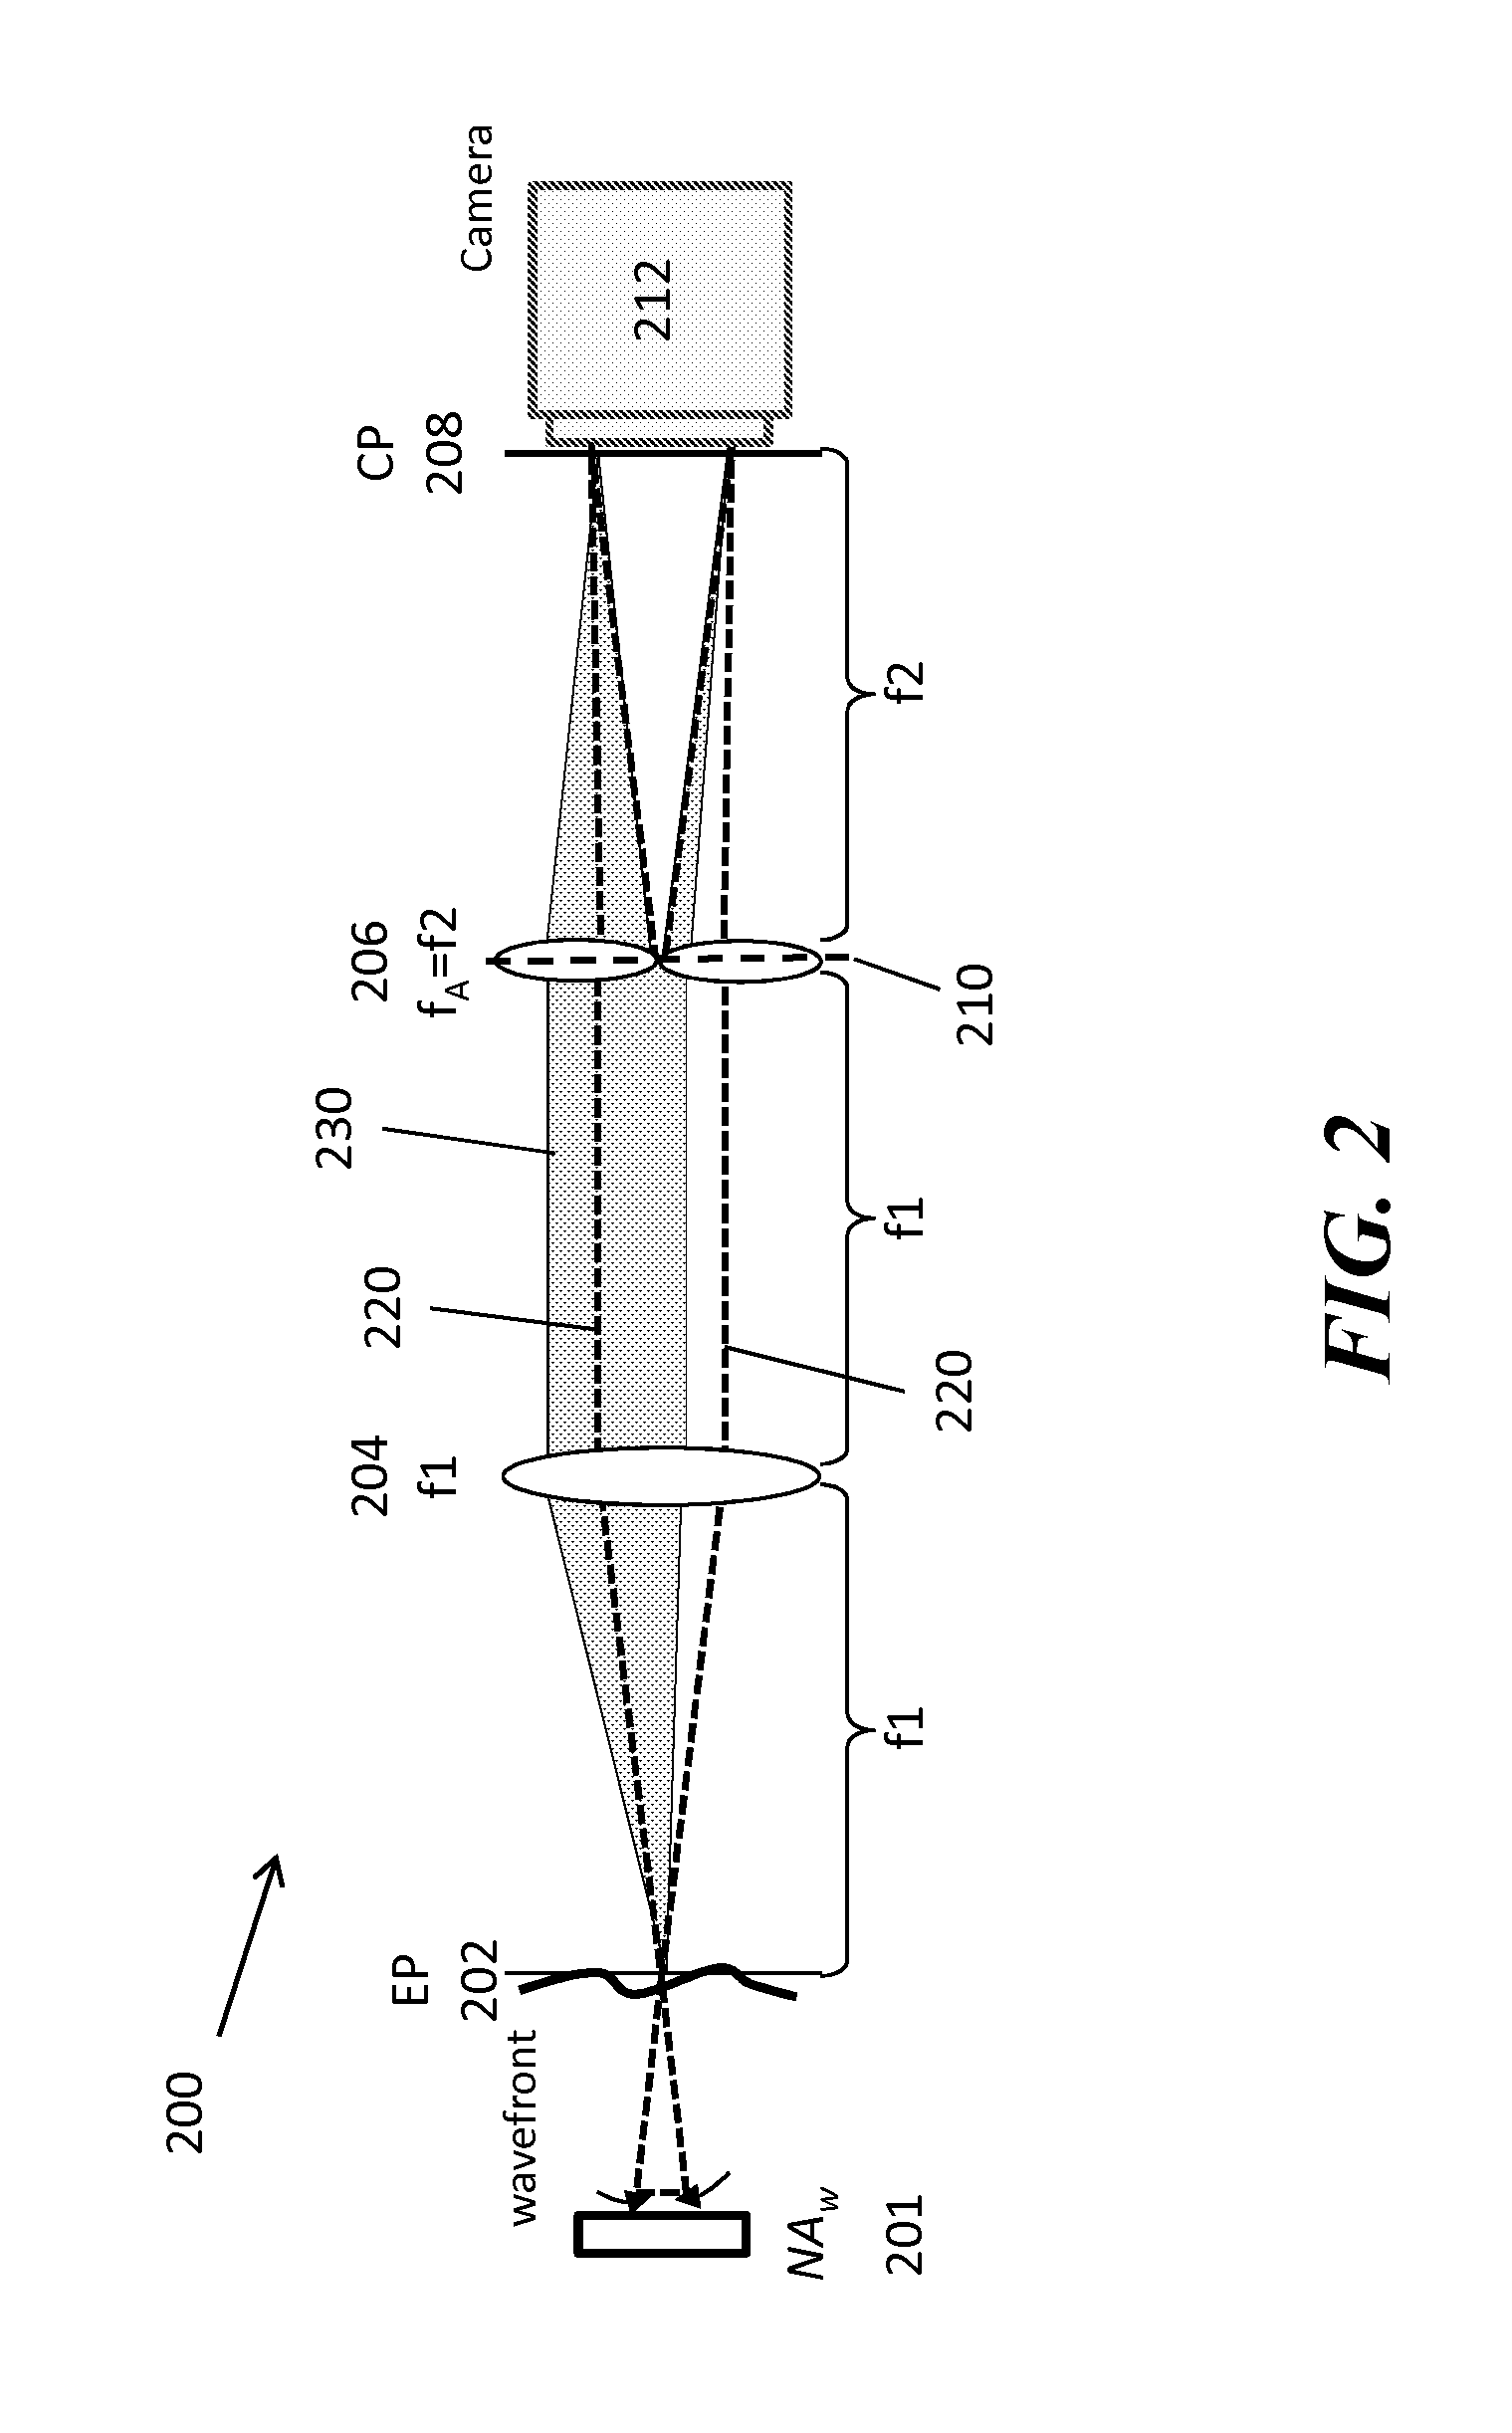 Partitioned aperture wavefront imaging method and system